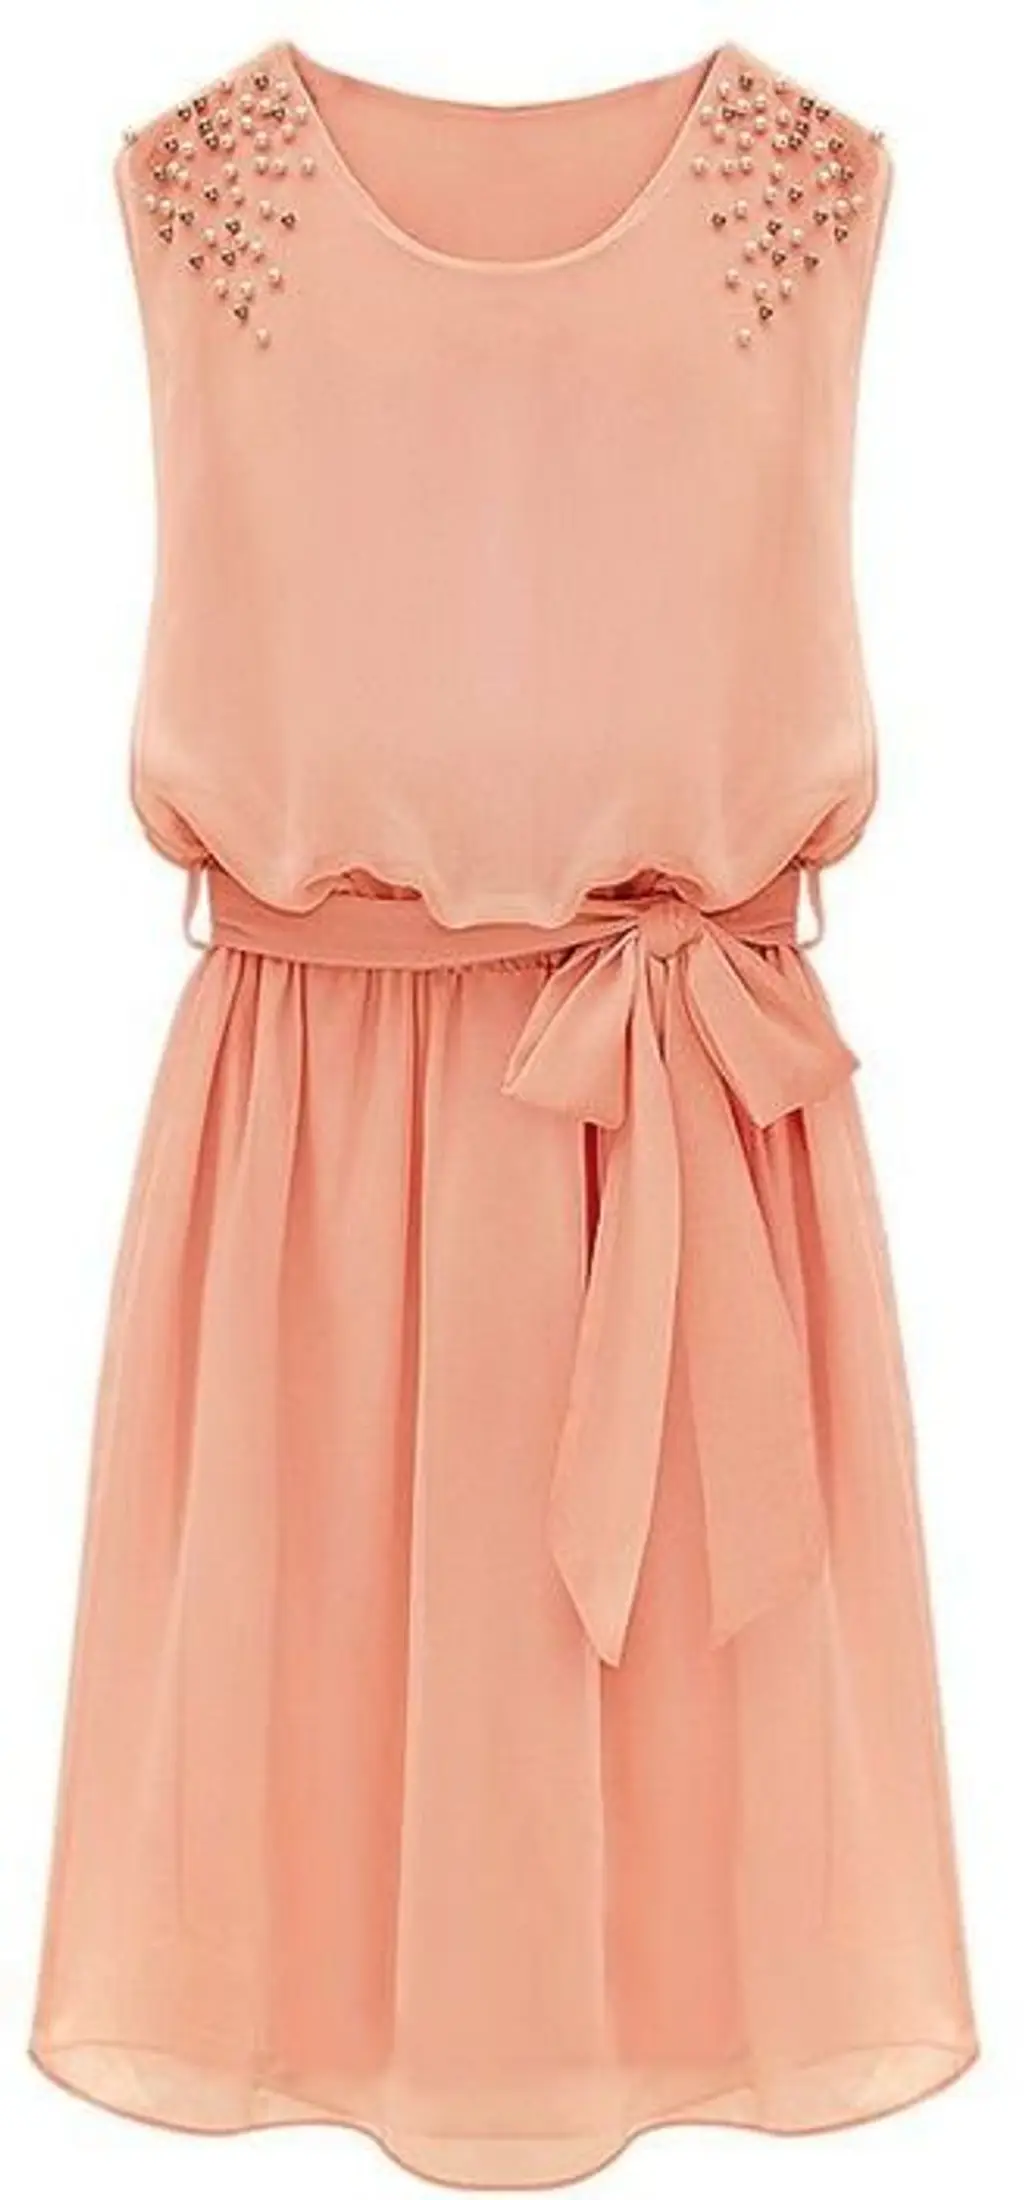 dress,day dress,clothing,pink,sleeve,